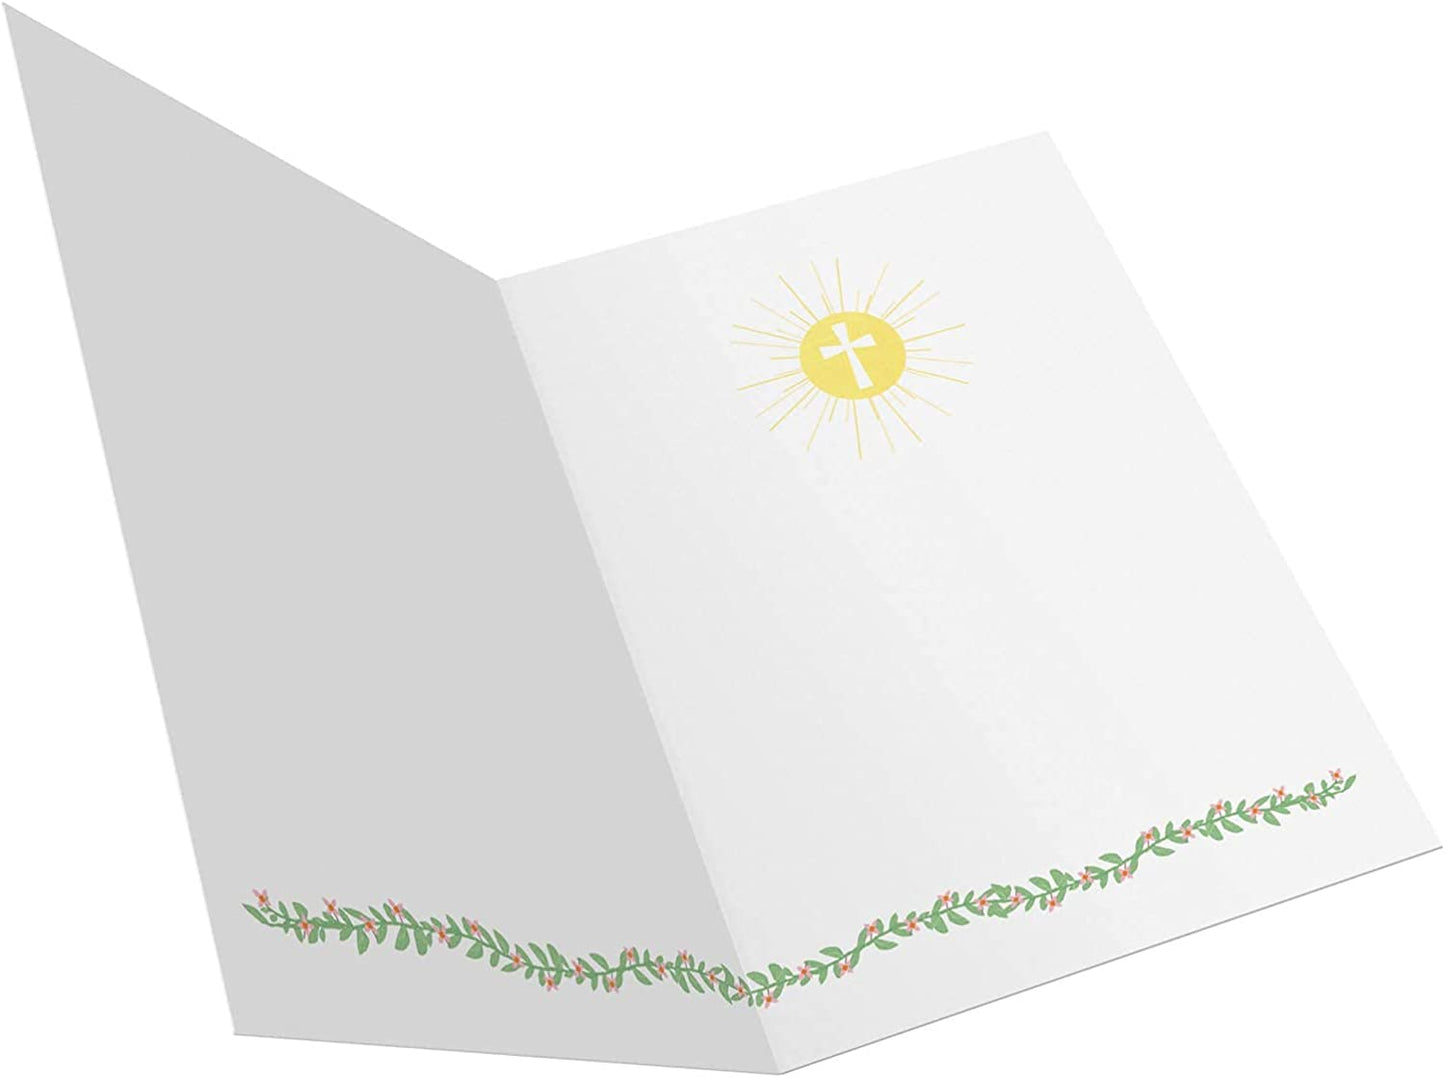 Tiny Expressions First Holy Communion Greeting Cards (4 Pack)